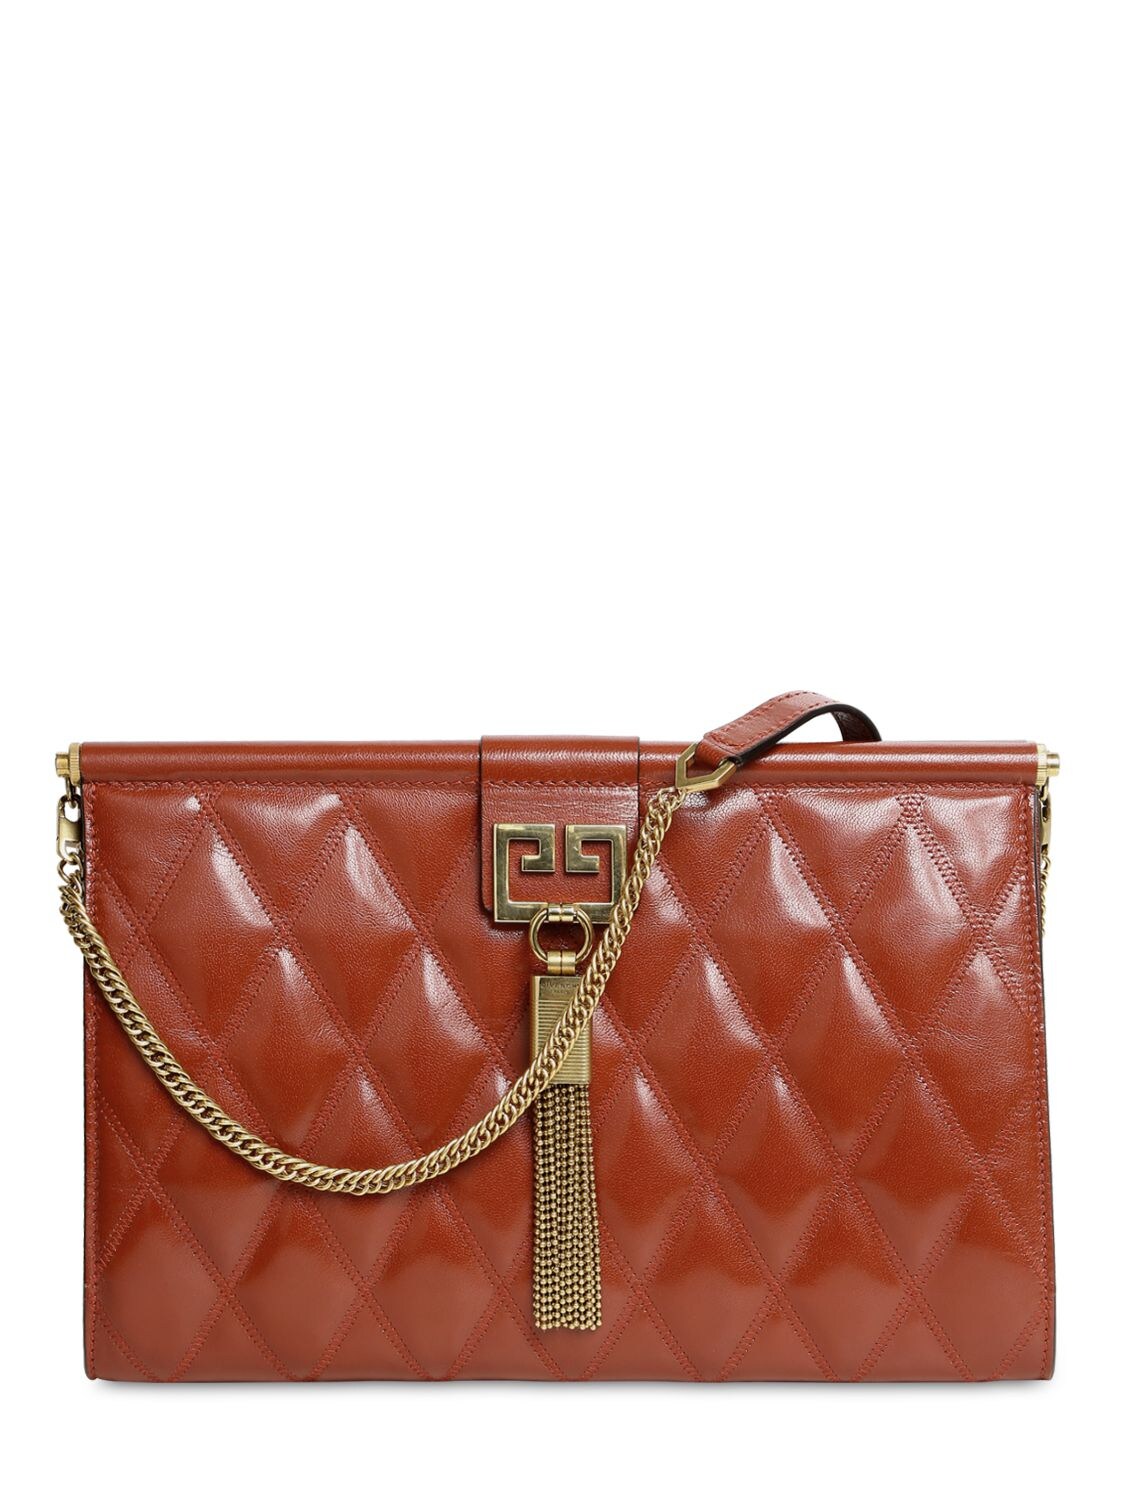 GIVENCHY MEDIUM GEM QUILTED LEATHER CLUTCH,68ID1A014-MJI20